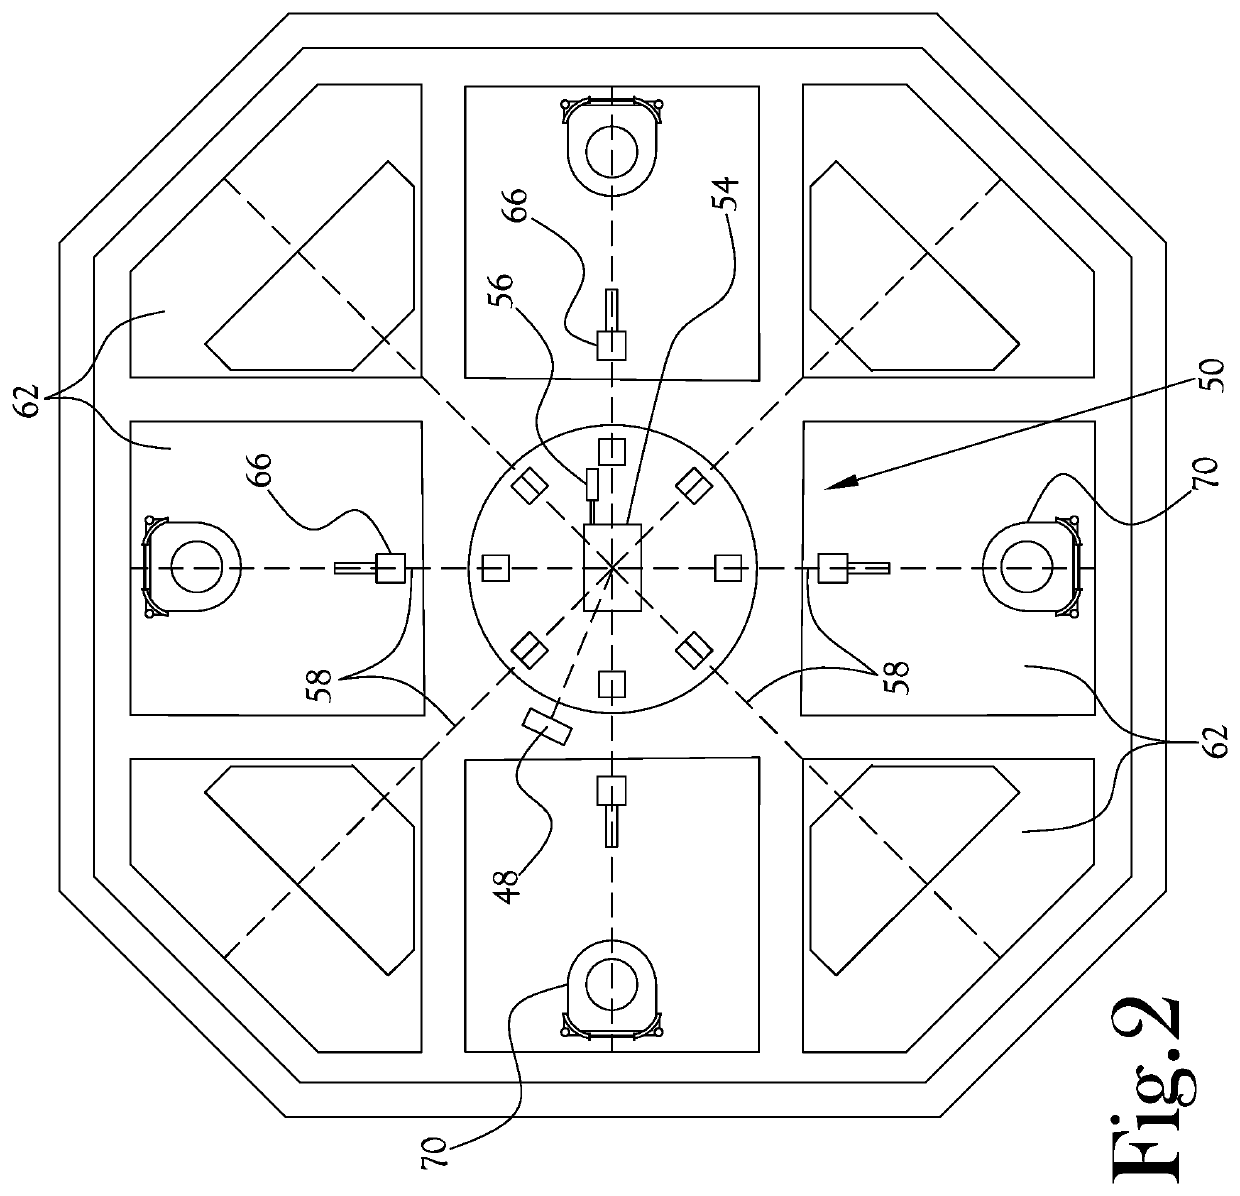 Compact proton therapy systems and methods